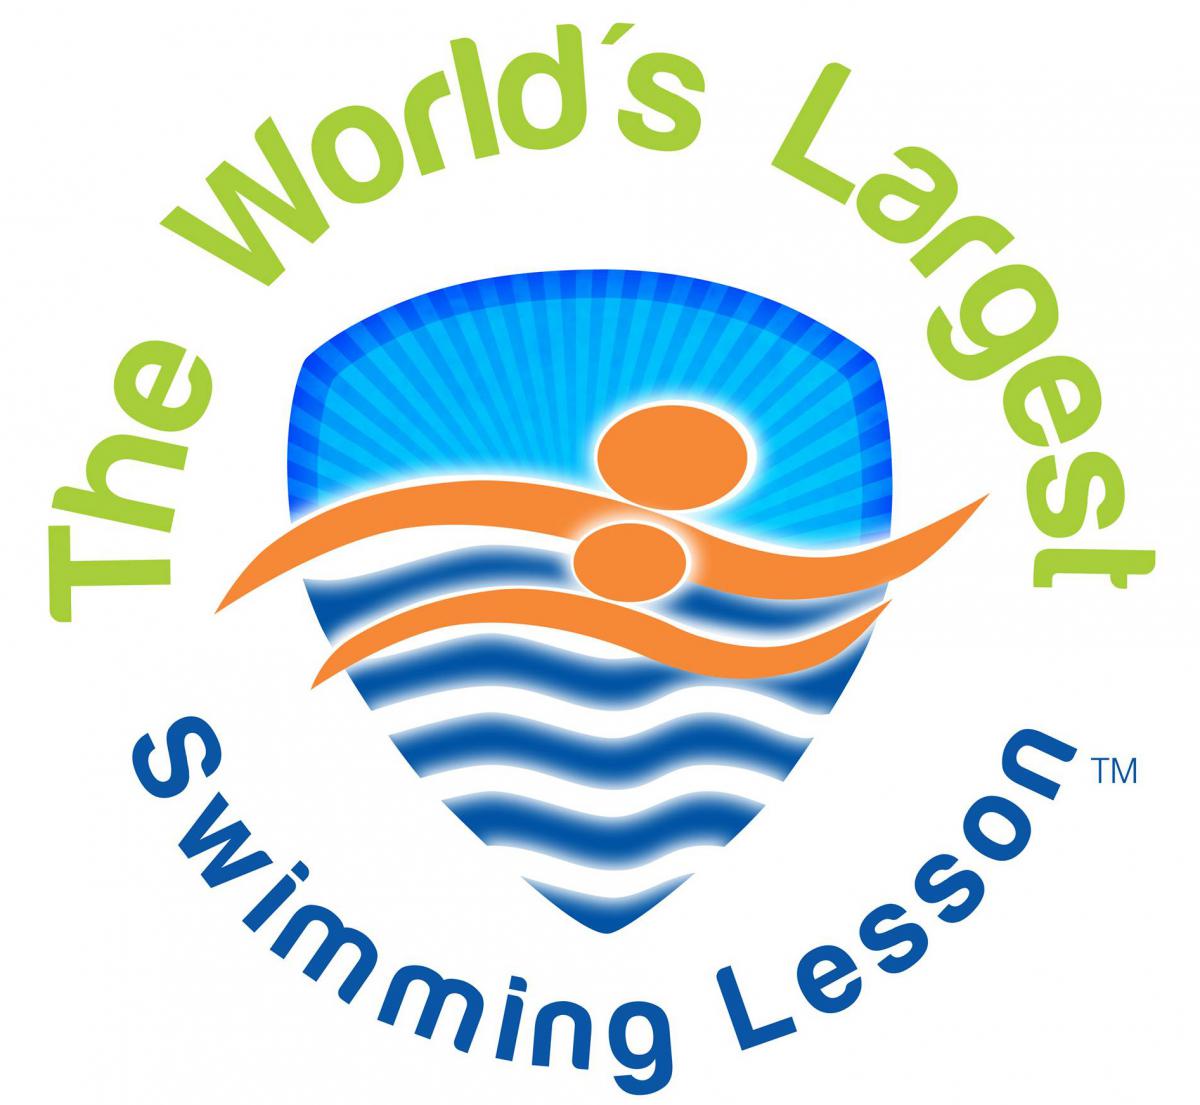 World's Largest Swimming Lesson